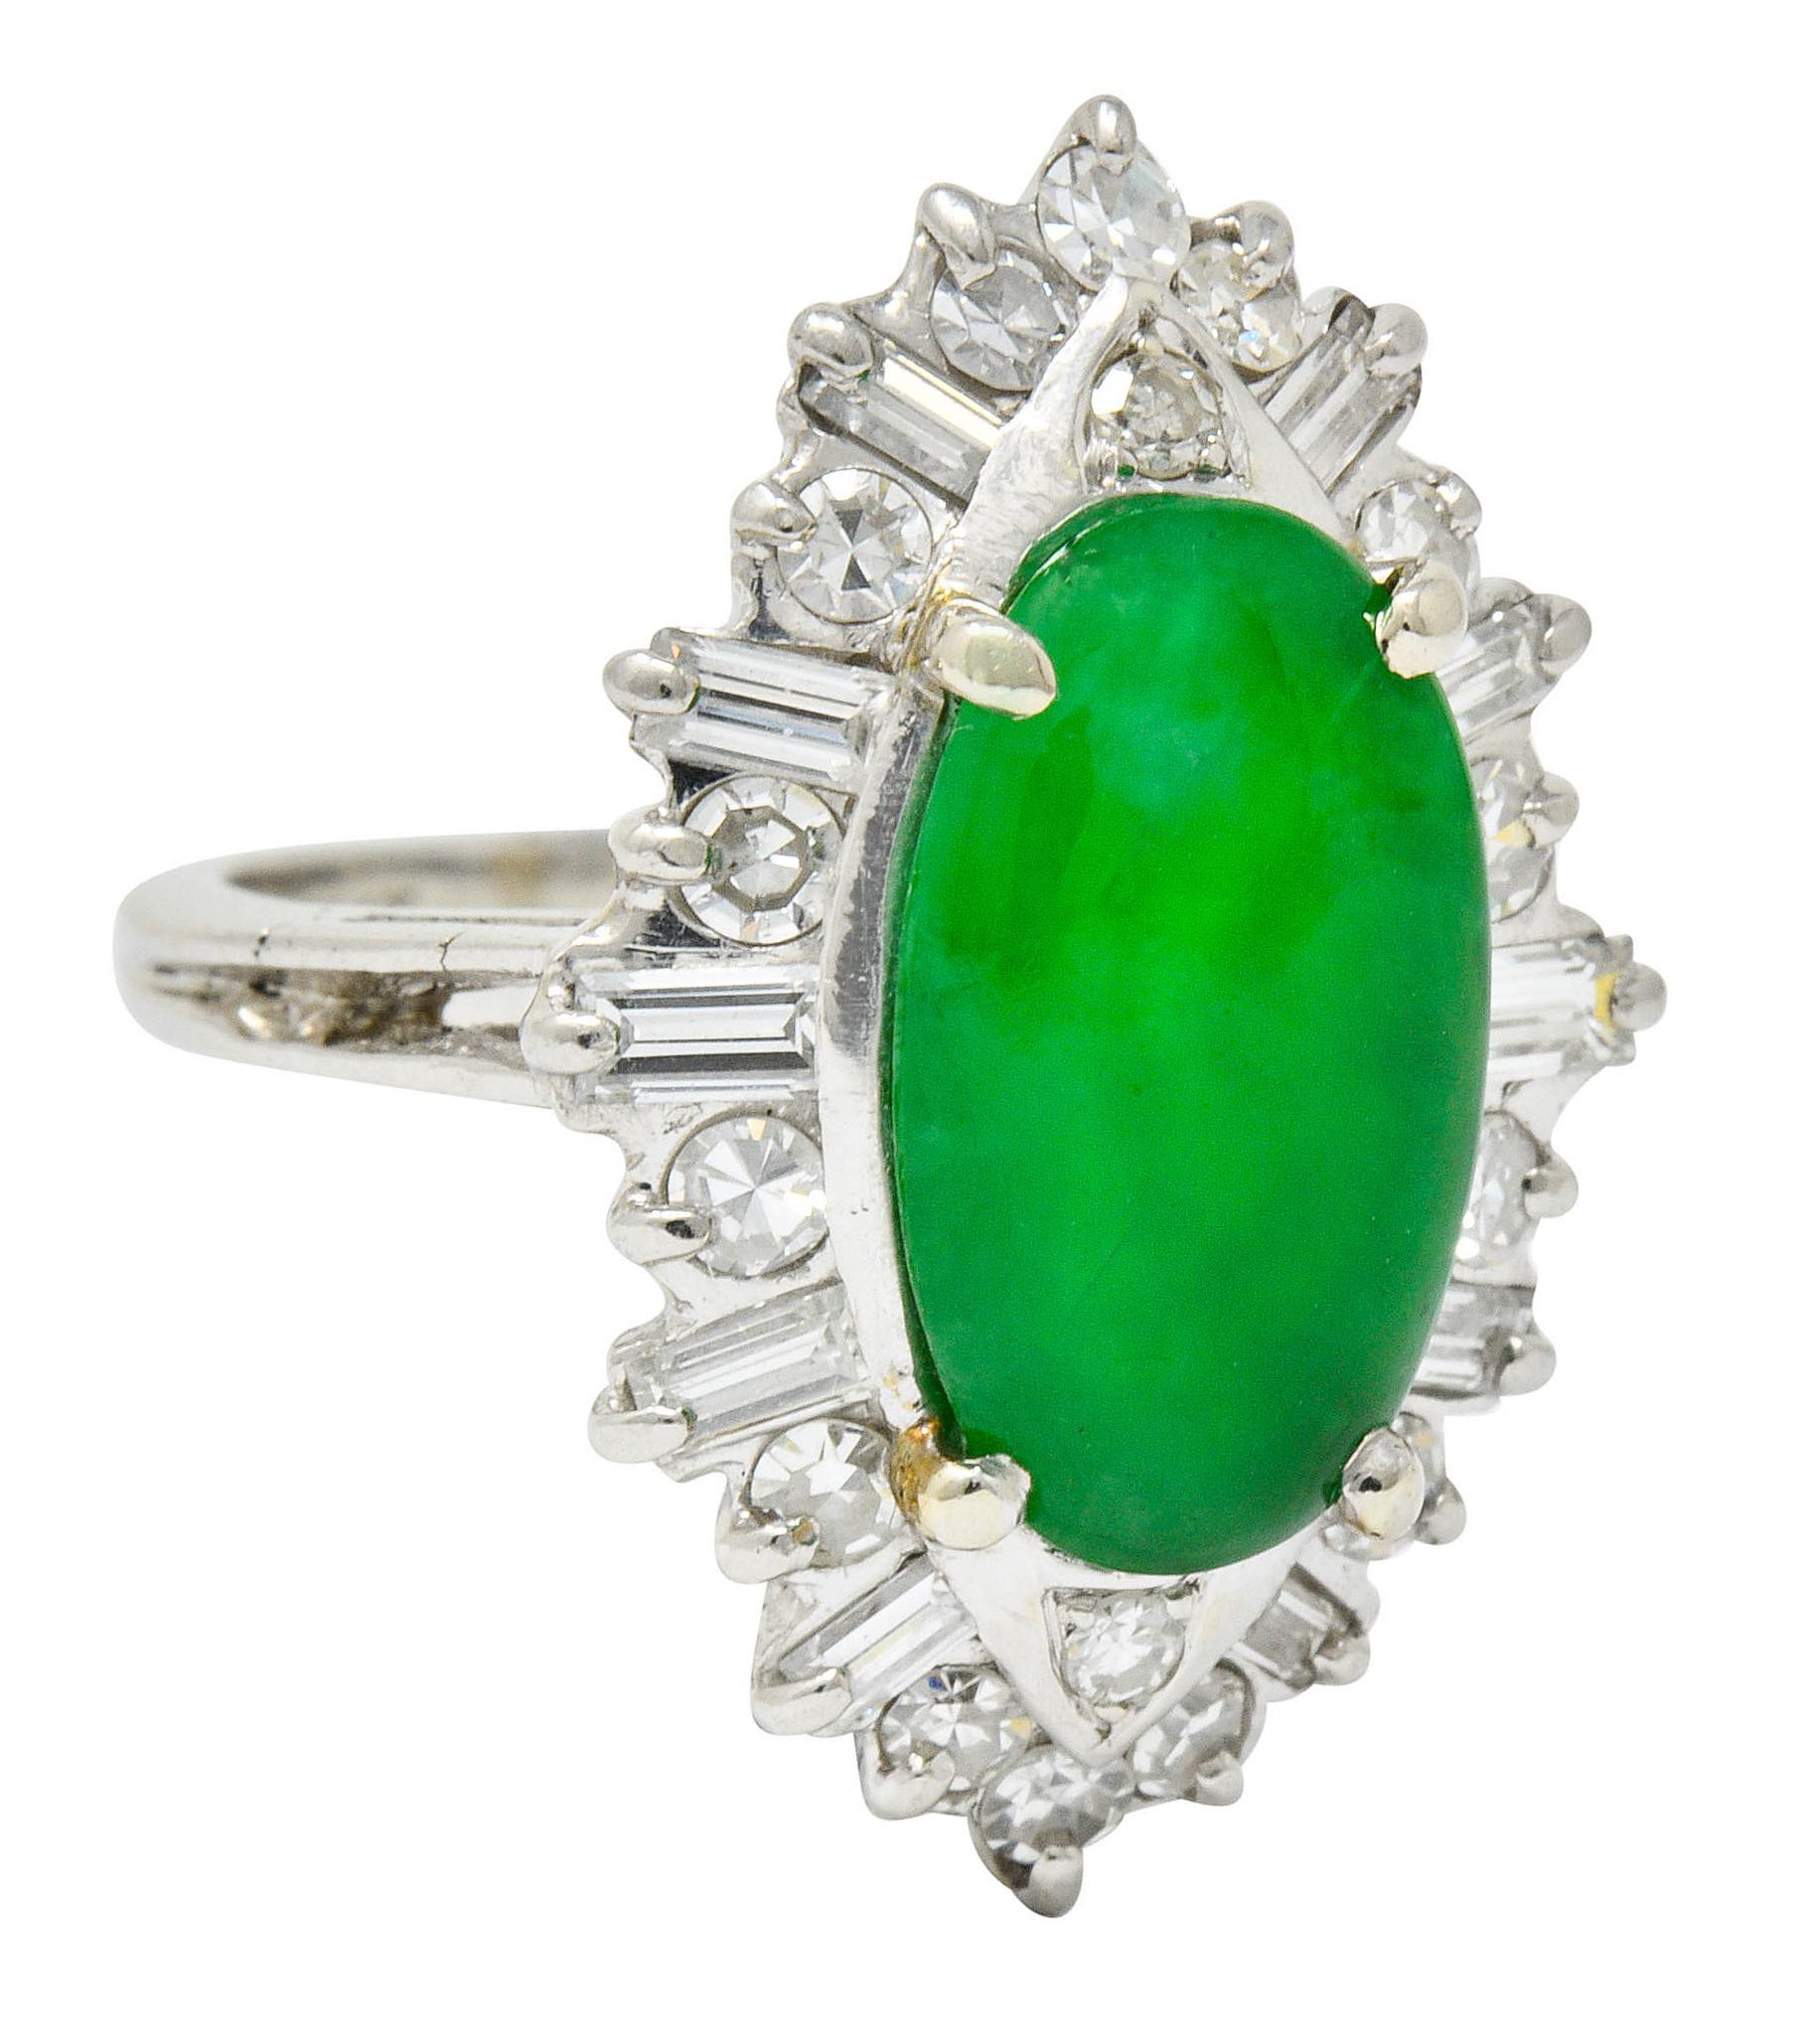 Cluster style ring centering an oval jadeite cabochon measuring approximately 14.3 x 8.3 mm

Bright in color, translucent green to dark green, with no indications of impregnation; type A jadeite jade

Surrounded by a diamond halo of baguette and